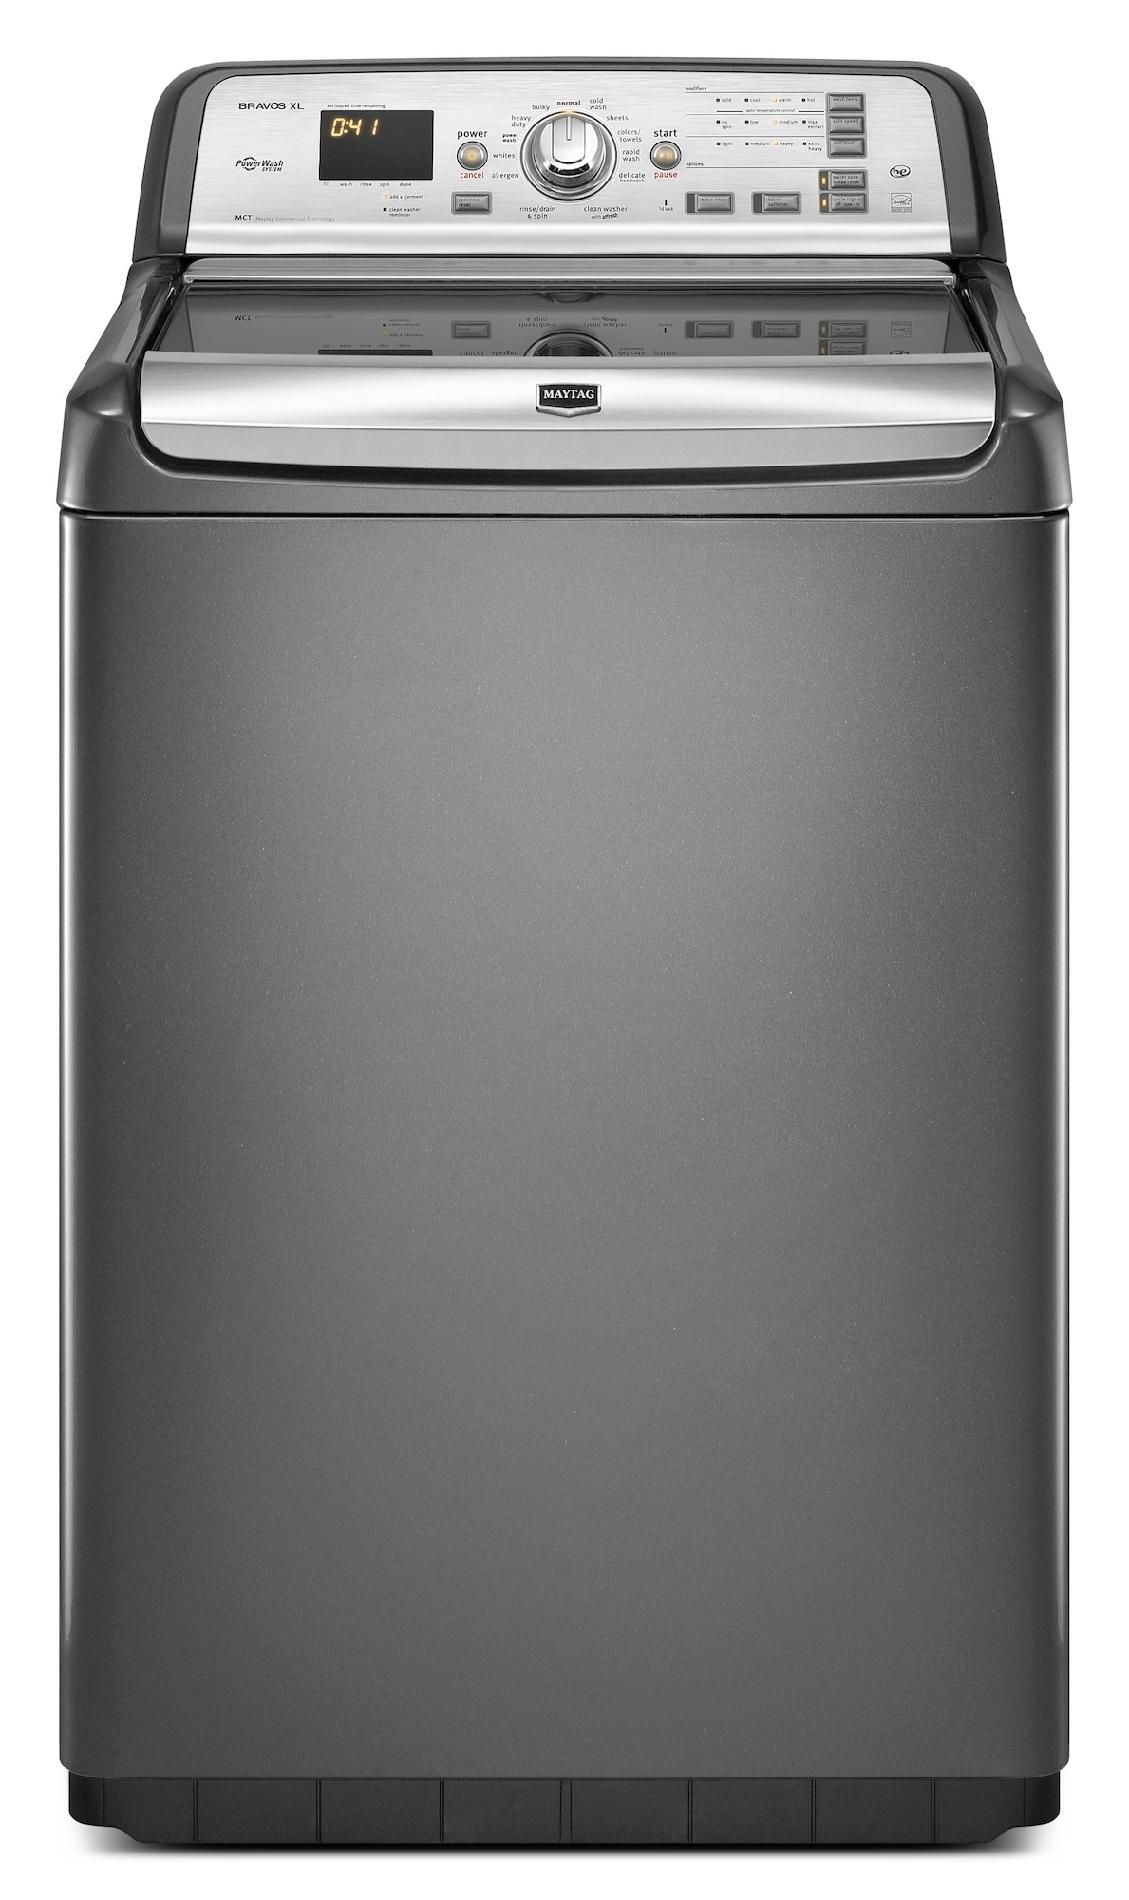 Maytag 4.6 cu. ft. High-Efficiency Top-Load Washer w/ PowerWash System - Granite Metallic 4.6 cu.ft. and greater